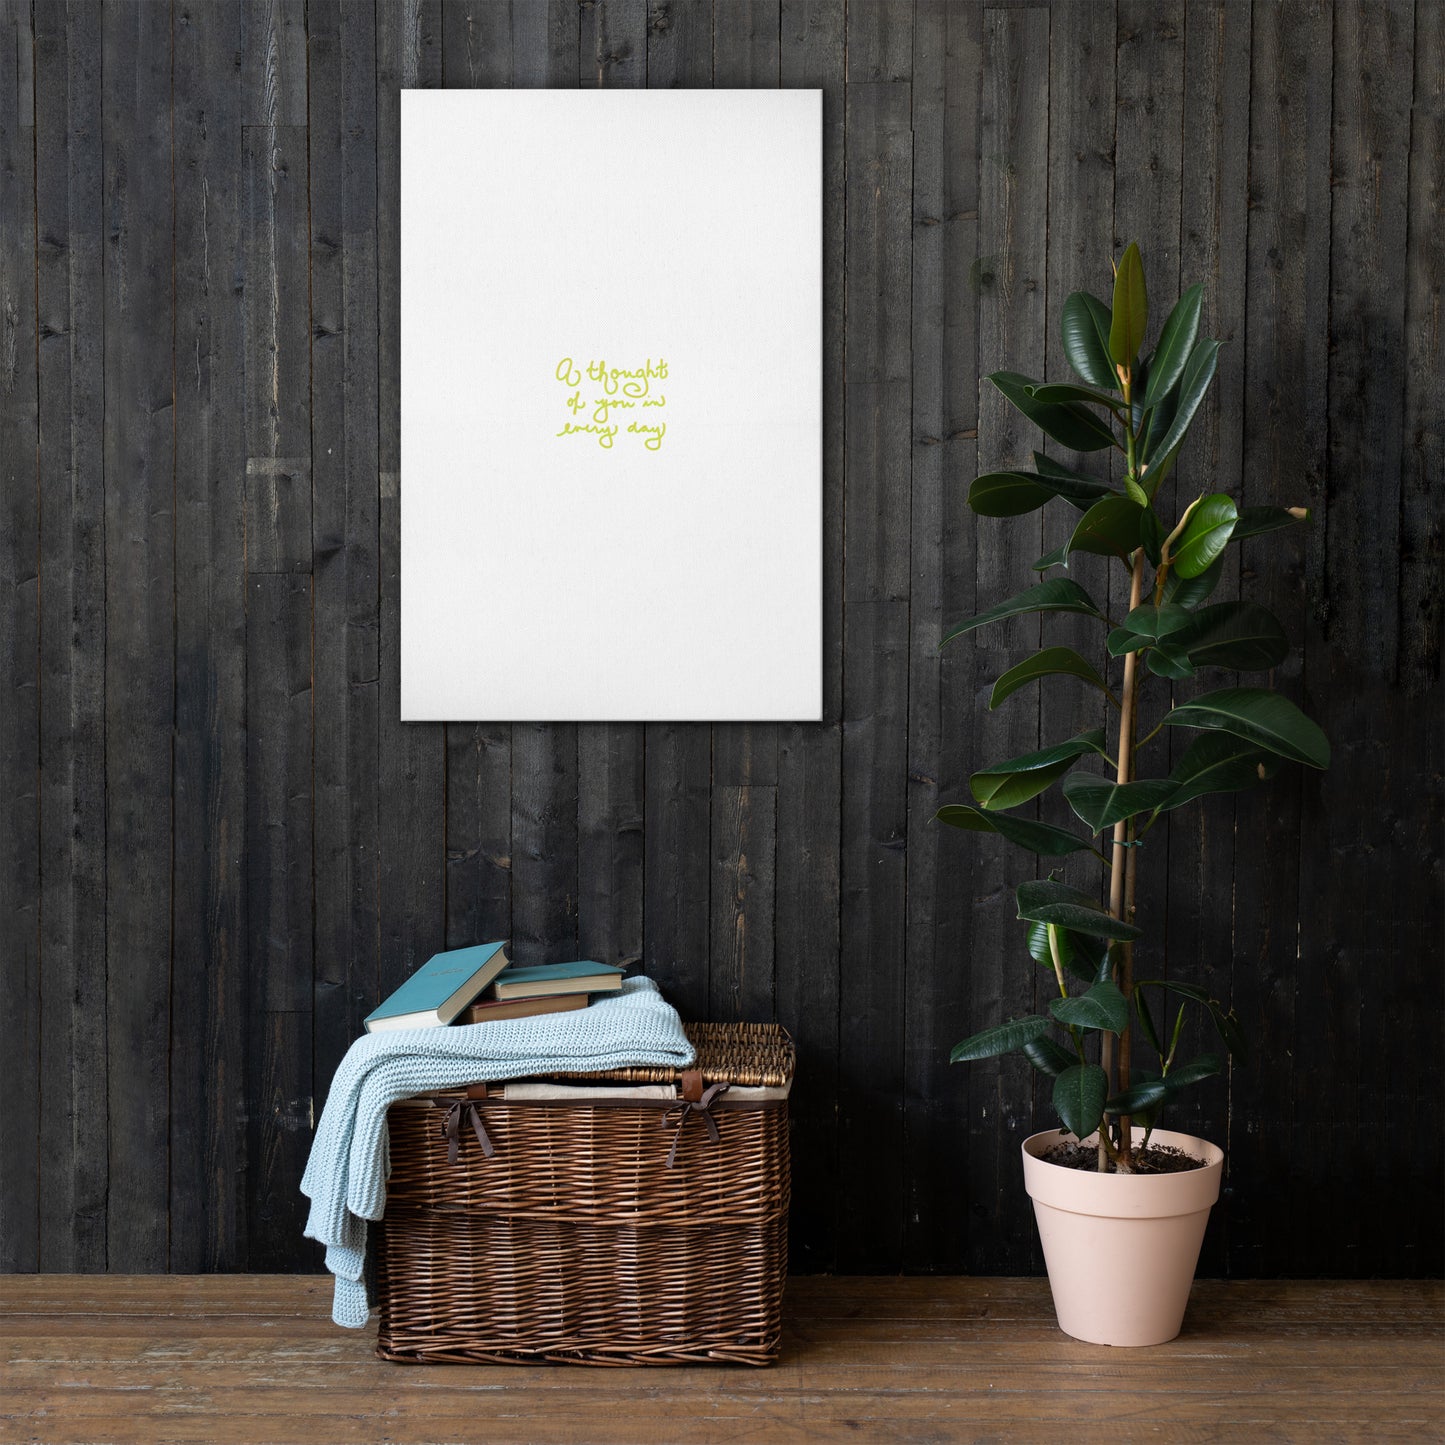 A Thought of You in Everyday Thin Canvas Print